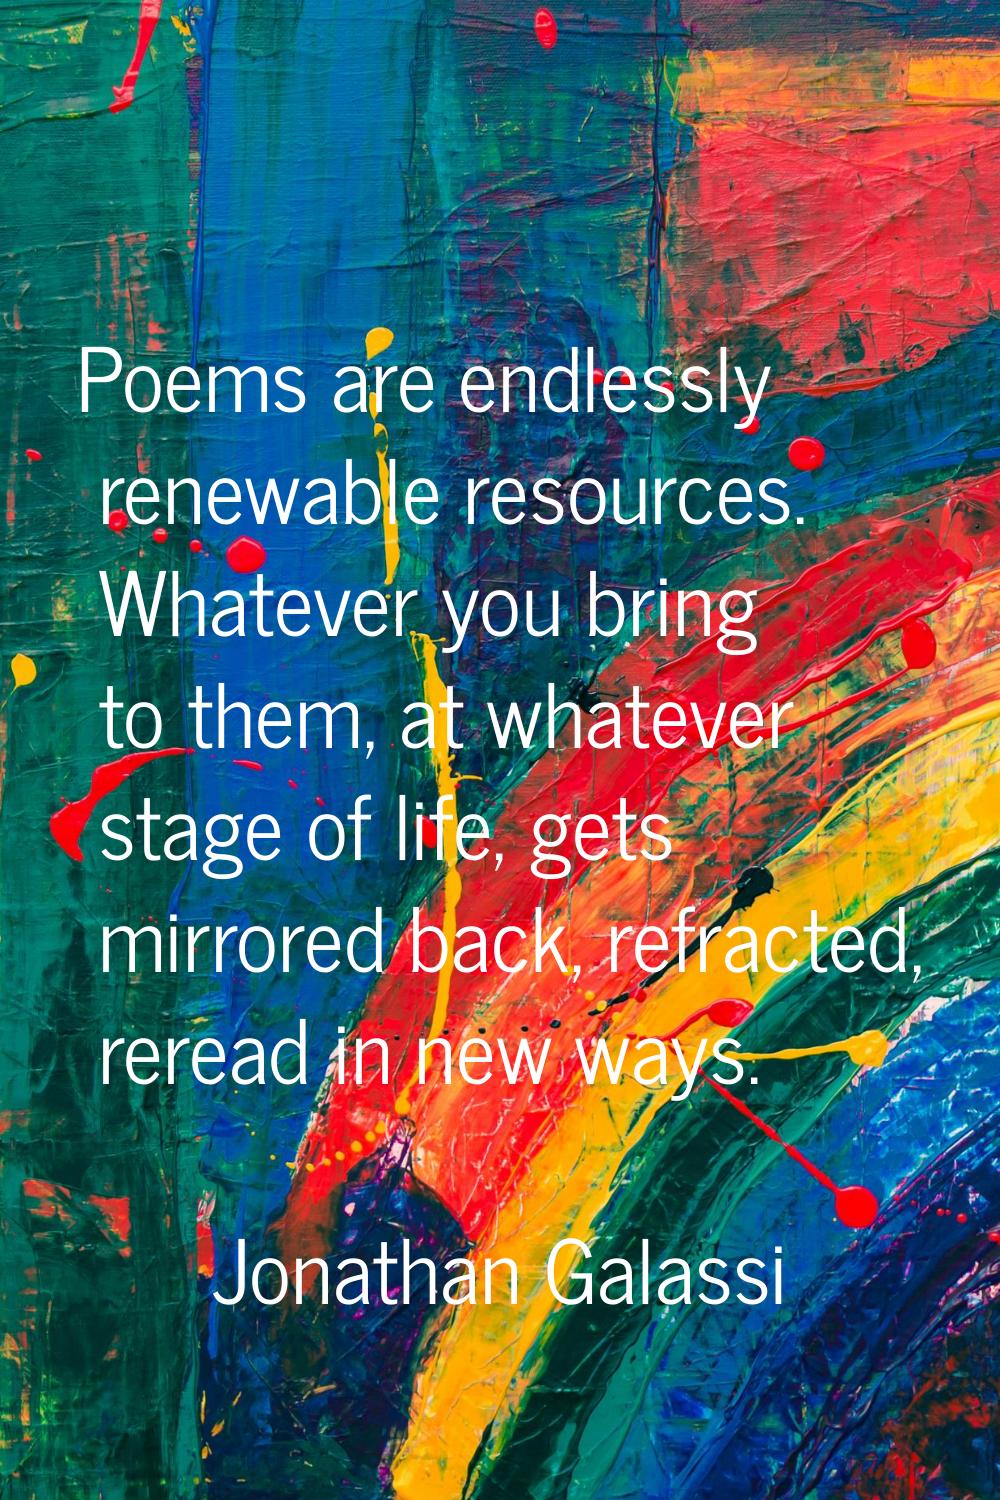 Poems are endlessly renewable resources. Whatever you bring to them, at whatever stage of life, get